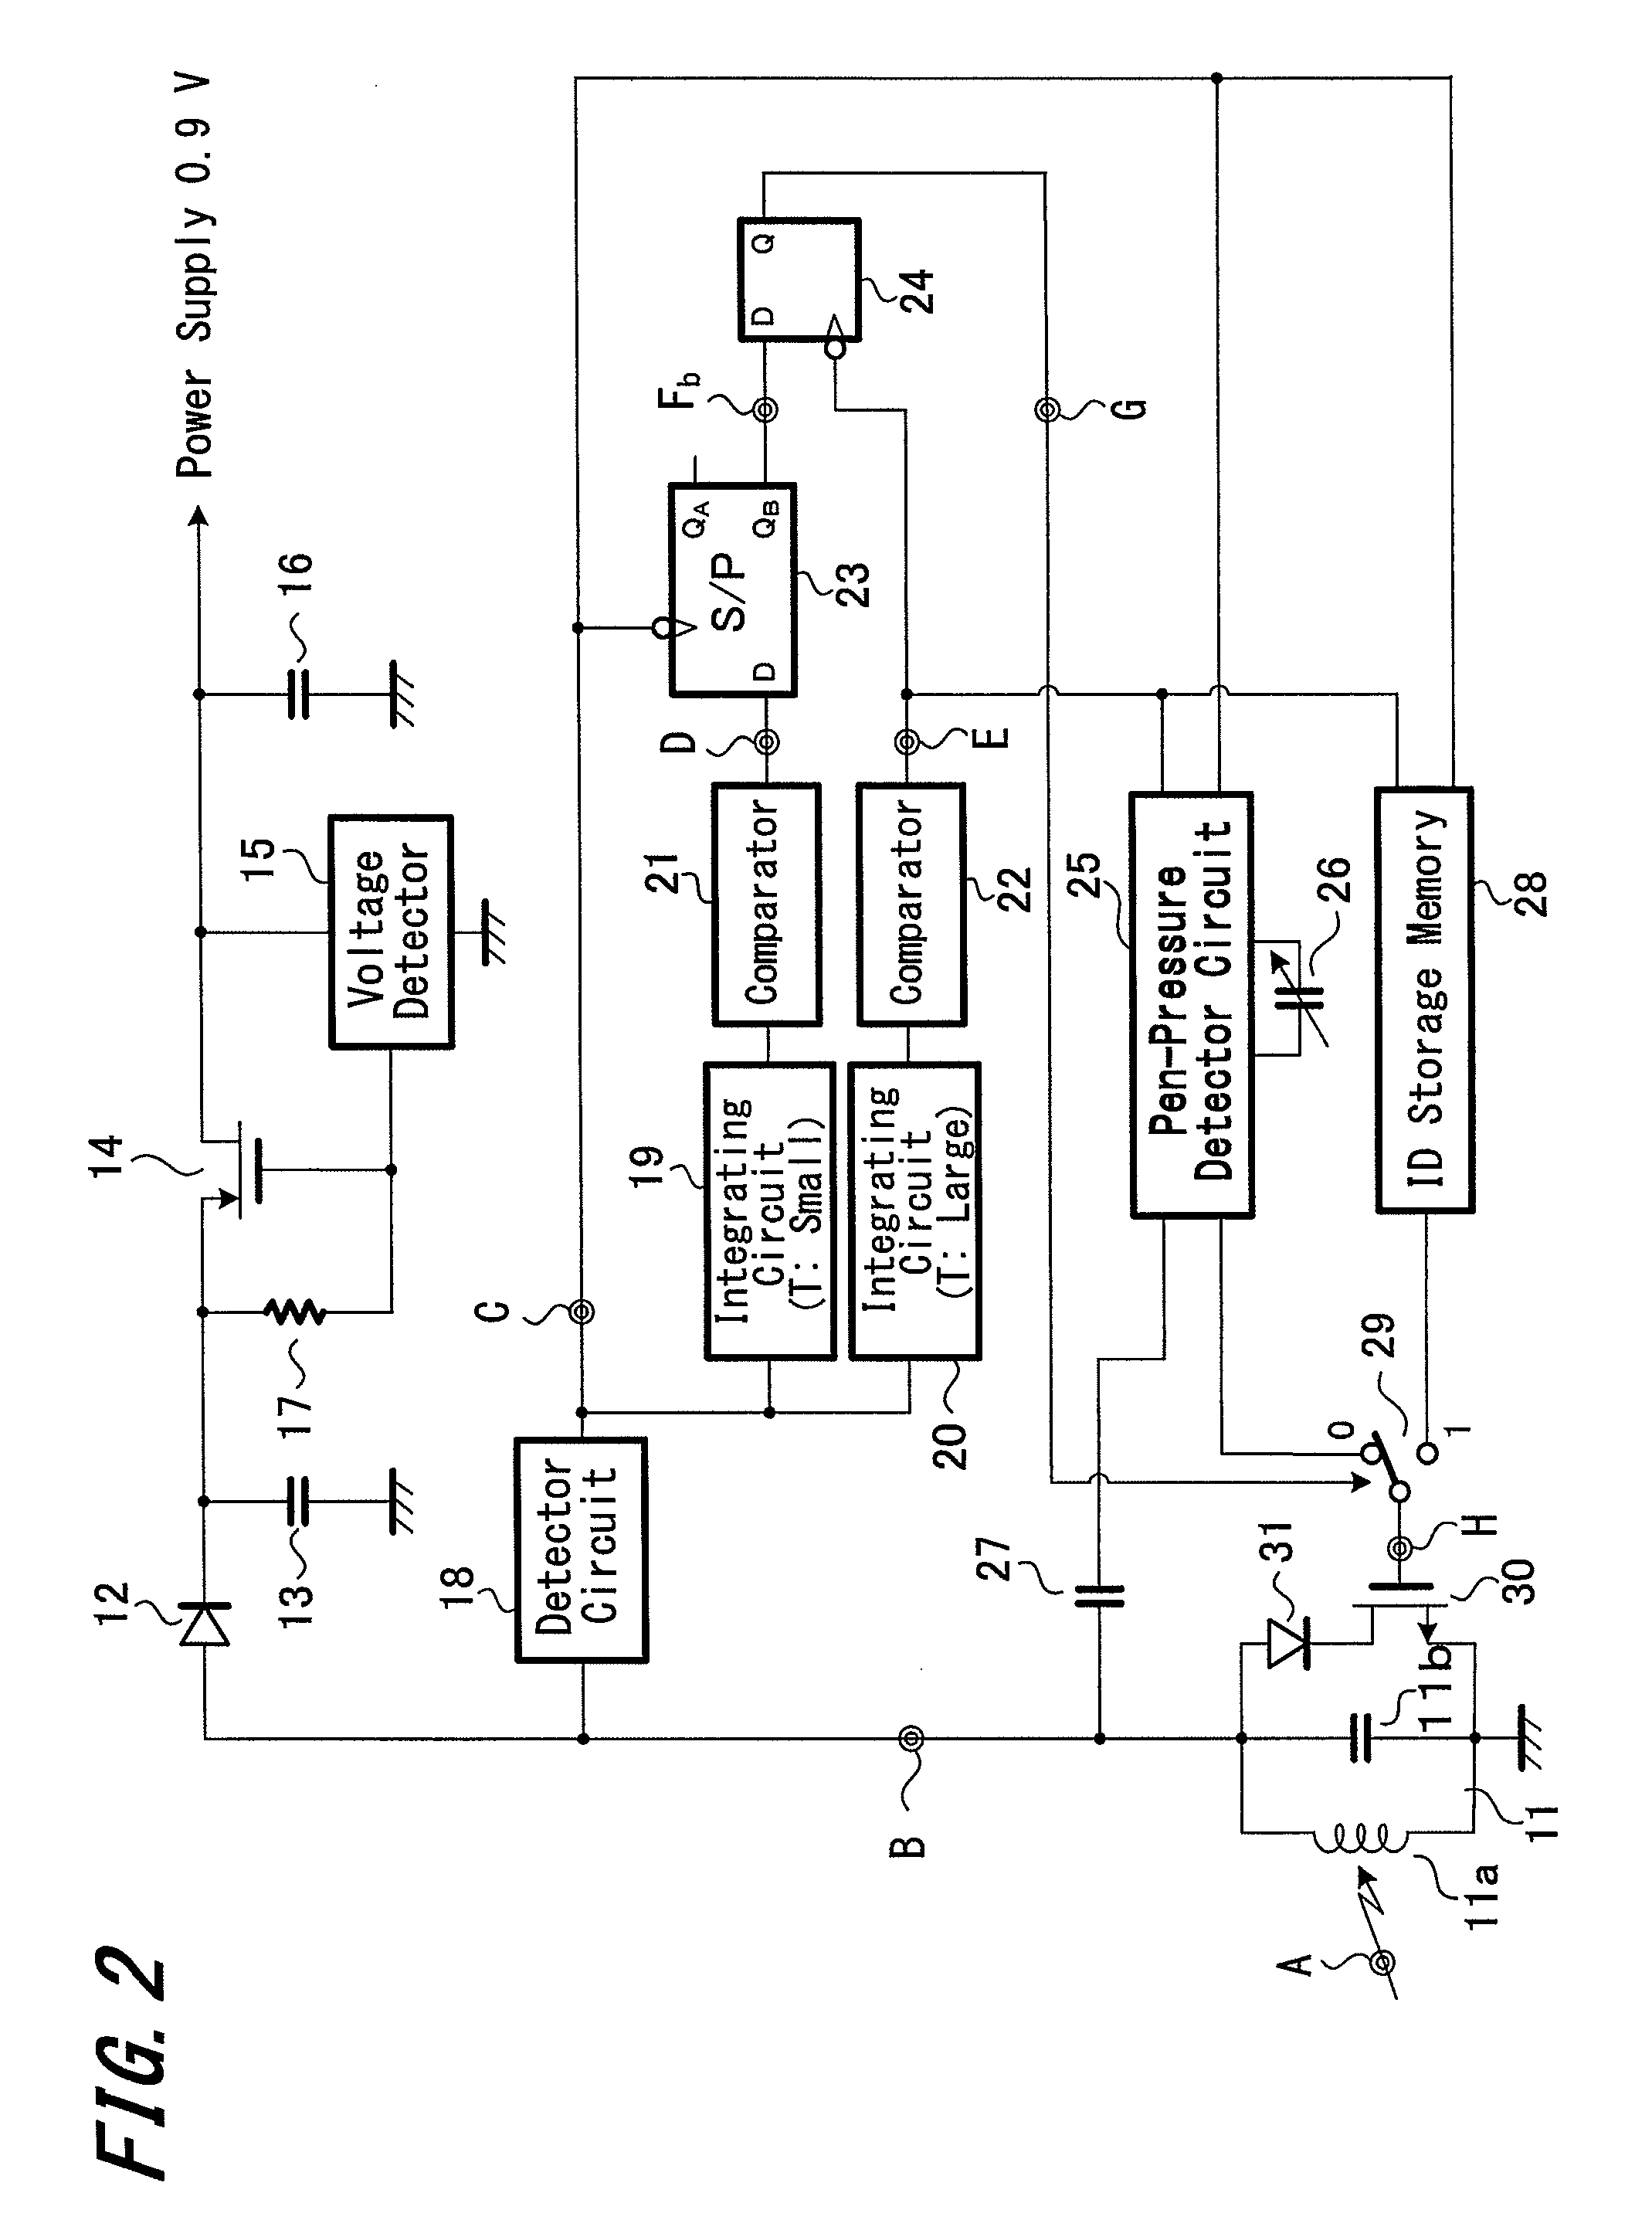 Position-detecting apparatus and position-indicating device